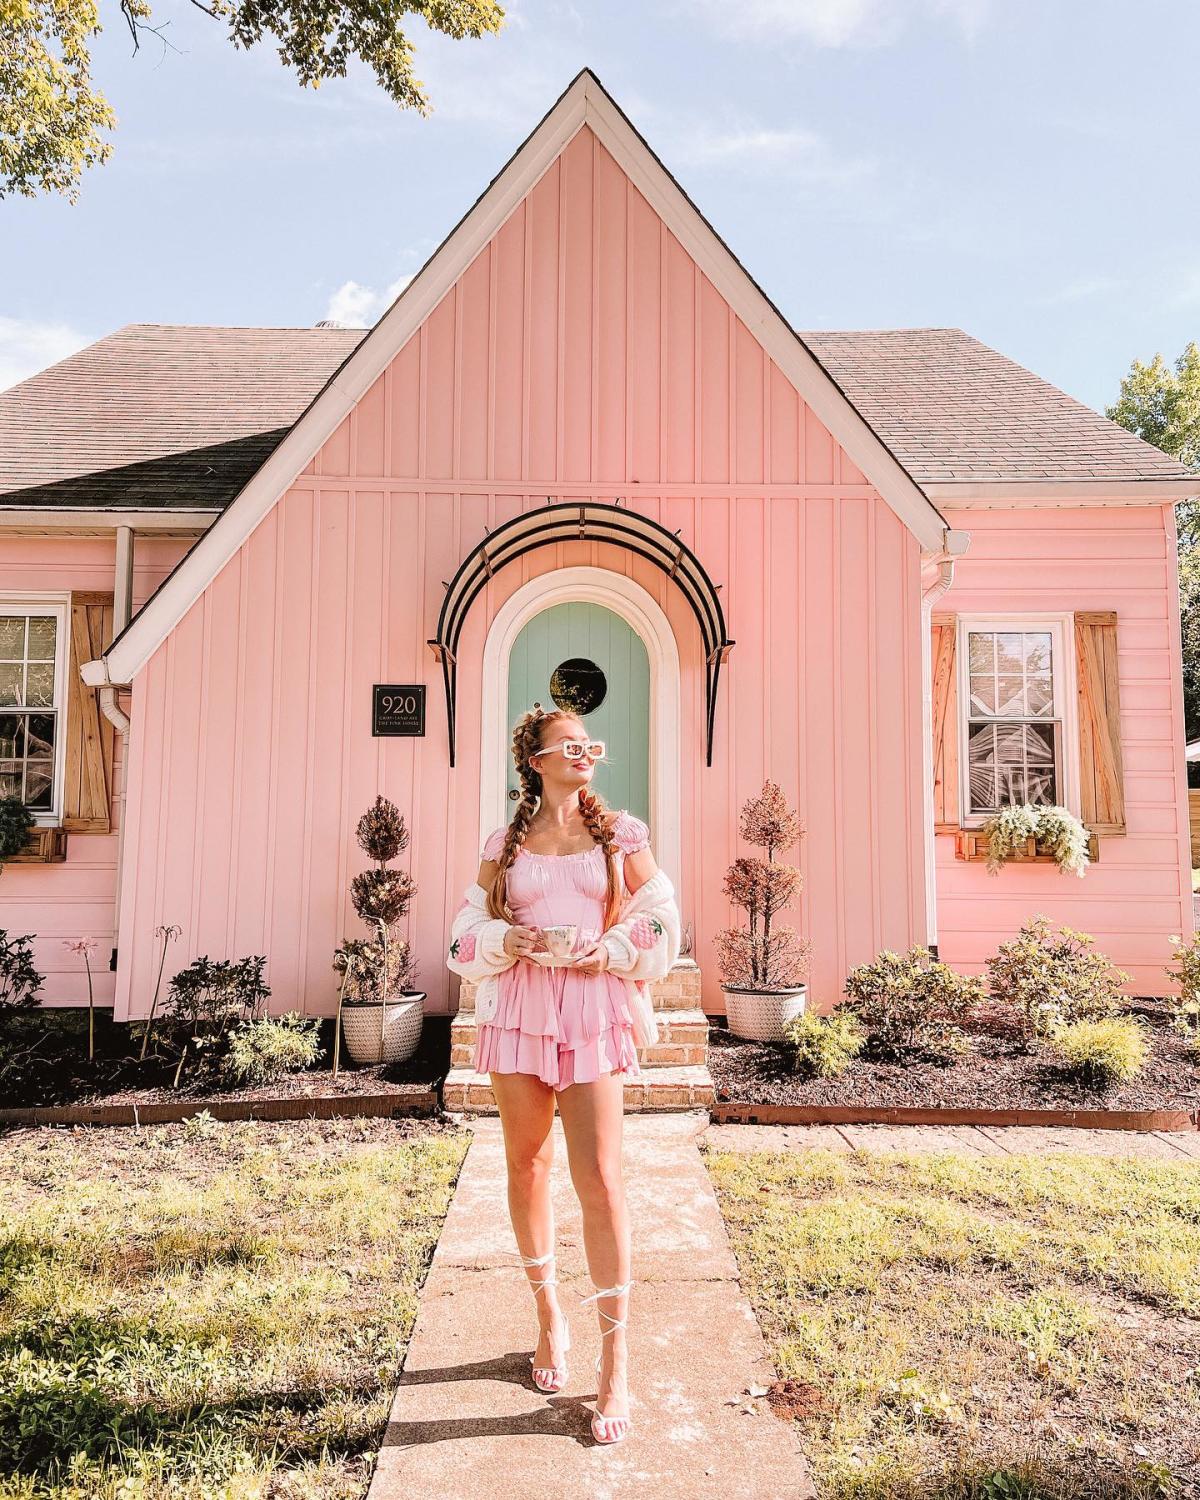 woman stands in front of pink house